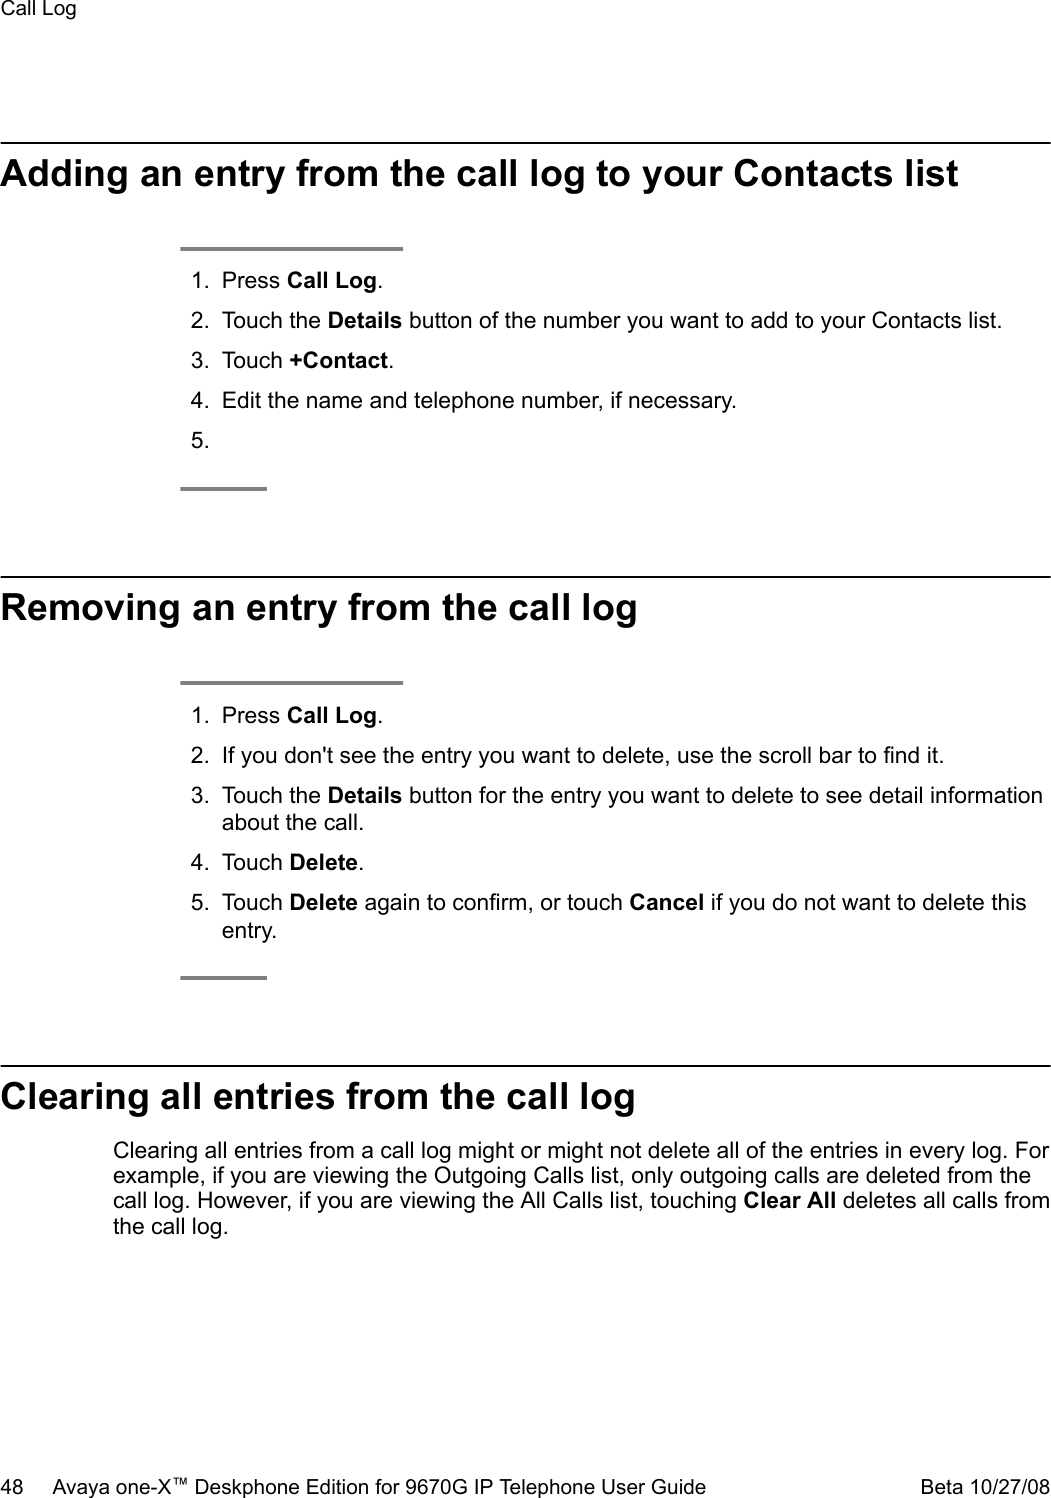 Adding an entry from the call log to your Contacts list1. Press Call Log.2. Touch the Details button of the number you want to add to your Contacts list.3. Touch +Contact.4. Edit the name and telephone number, if necessary.5.Removing an entry from the call log1. Press Call Log.2. If you don&apos;t see the entry you want to delete, use the scroll bar to find it.3. Touch the Details button for the entry you want to delete to see detail informationabout the call.4. Touch Delete.5. Touch Delete again to confirm, or touch Cancel if you do not want to delete thisentry.Clearing all entries from the call logClearing all entries from a call log might or might not delete all of the entries in every log. Forexample, if you are viewing the Outgoing Calls list, only outgoing calls are deleted from thecall log. However, if you are viewing the All Calls list, touching Clear All deletes all calls fromthe call log.Call Log48     Avaya one-X™ Deskphone Edition for 9670G IP Telephone User Guide Beta 10/27/08